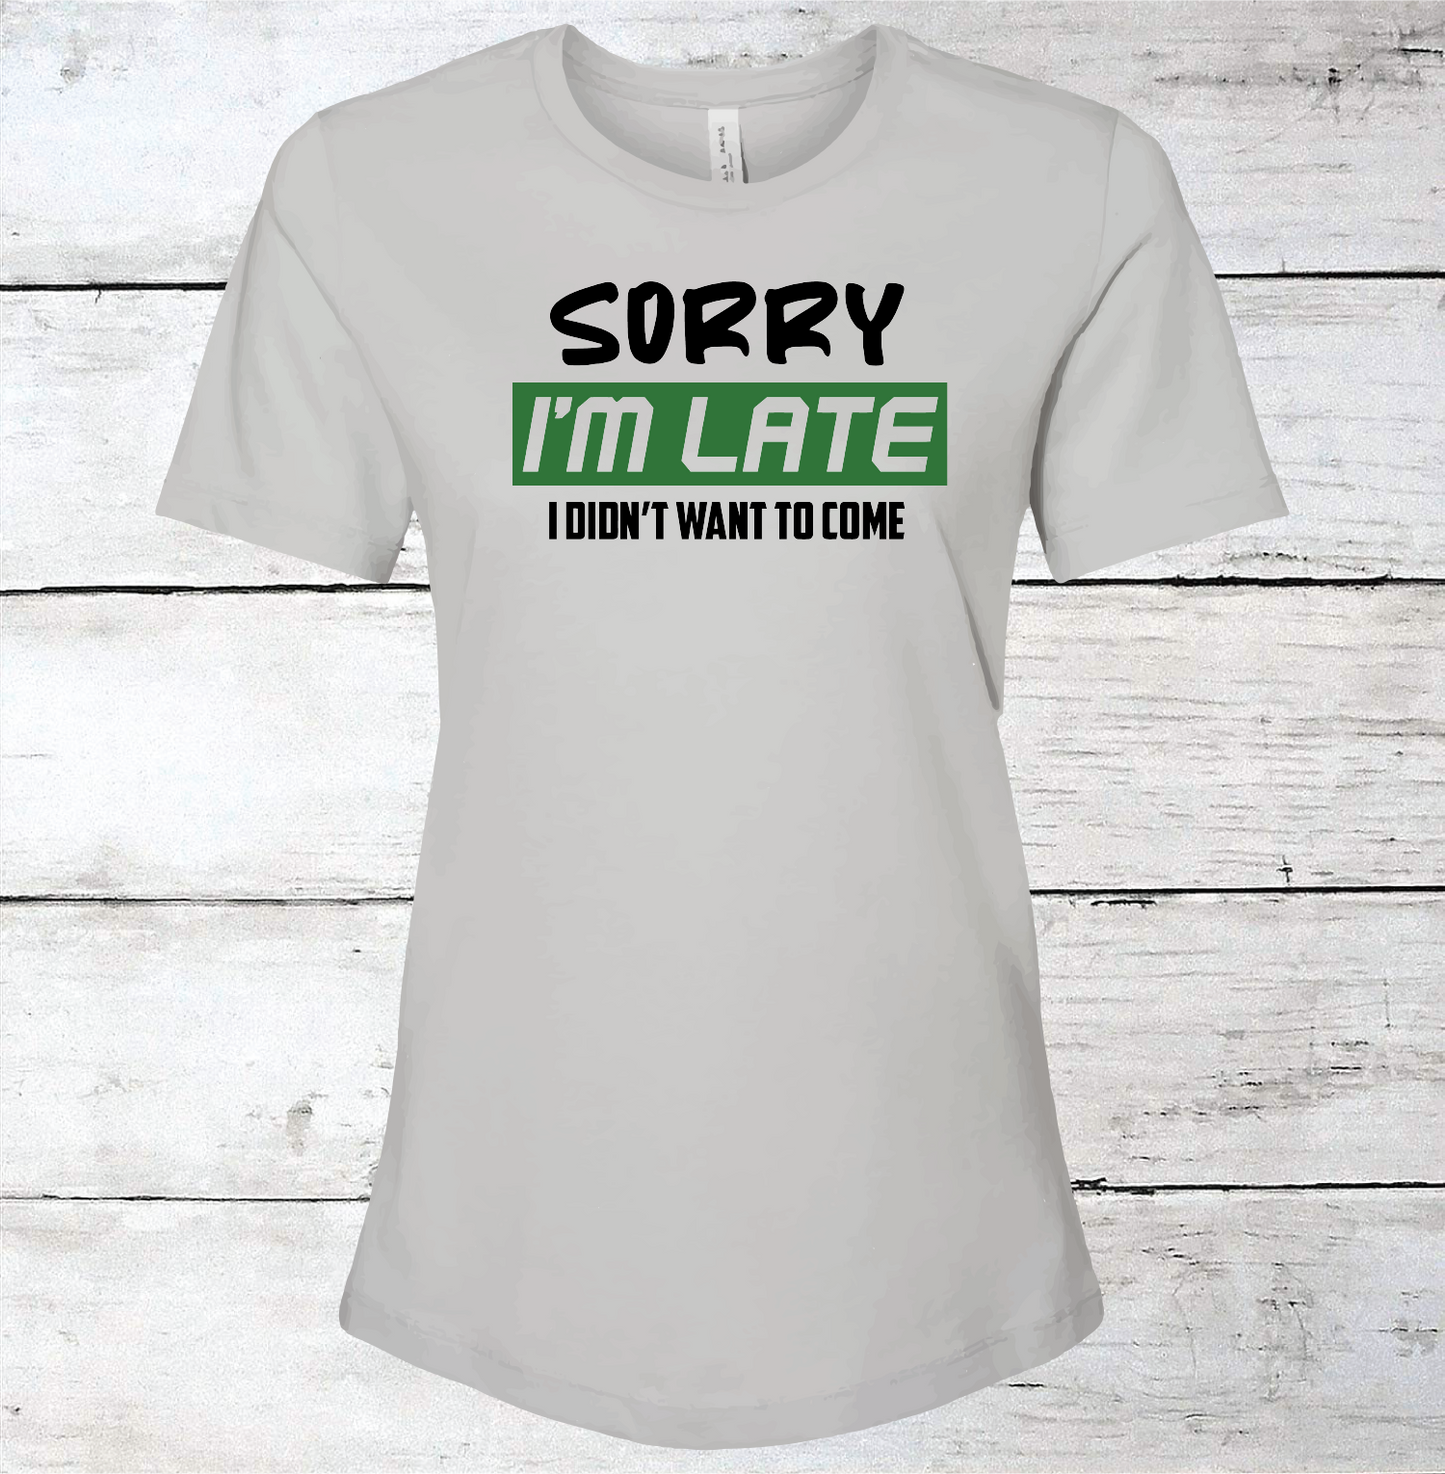 Sorry I'm Late, I Didn't Want to Come T-Shirt